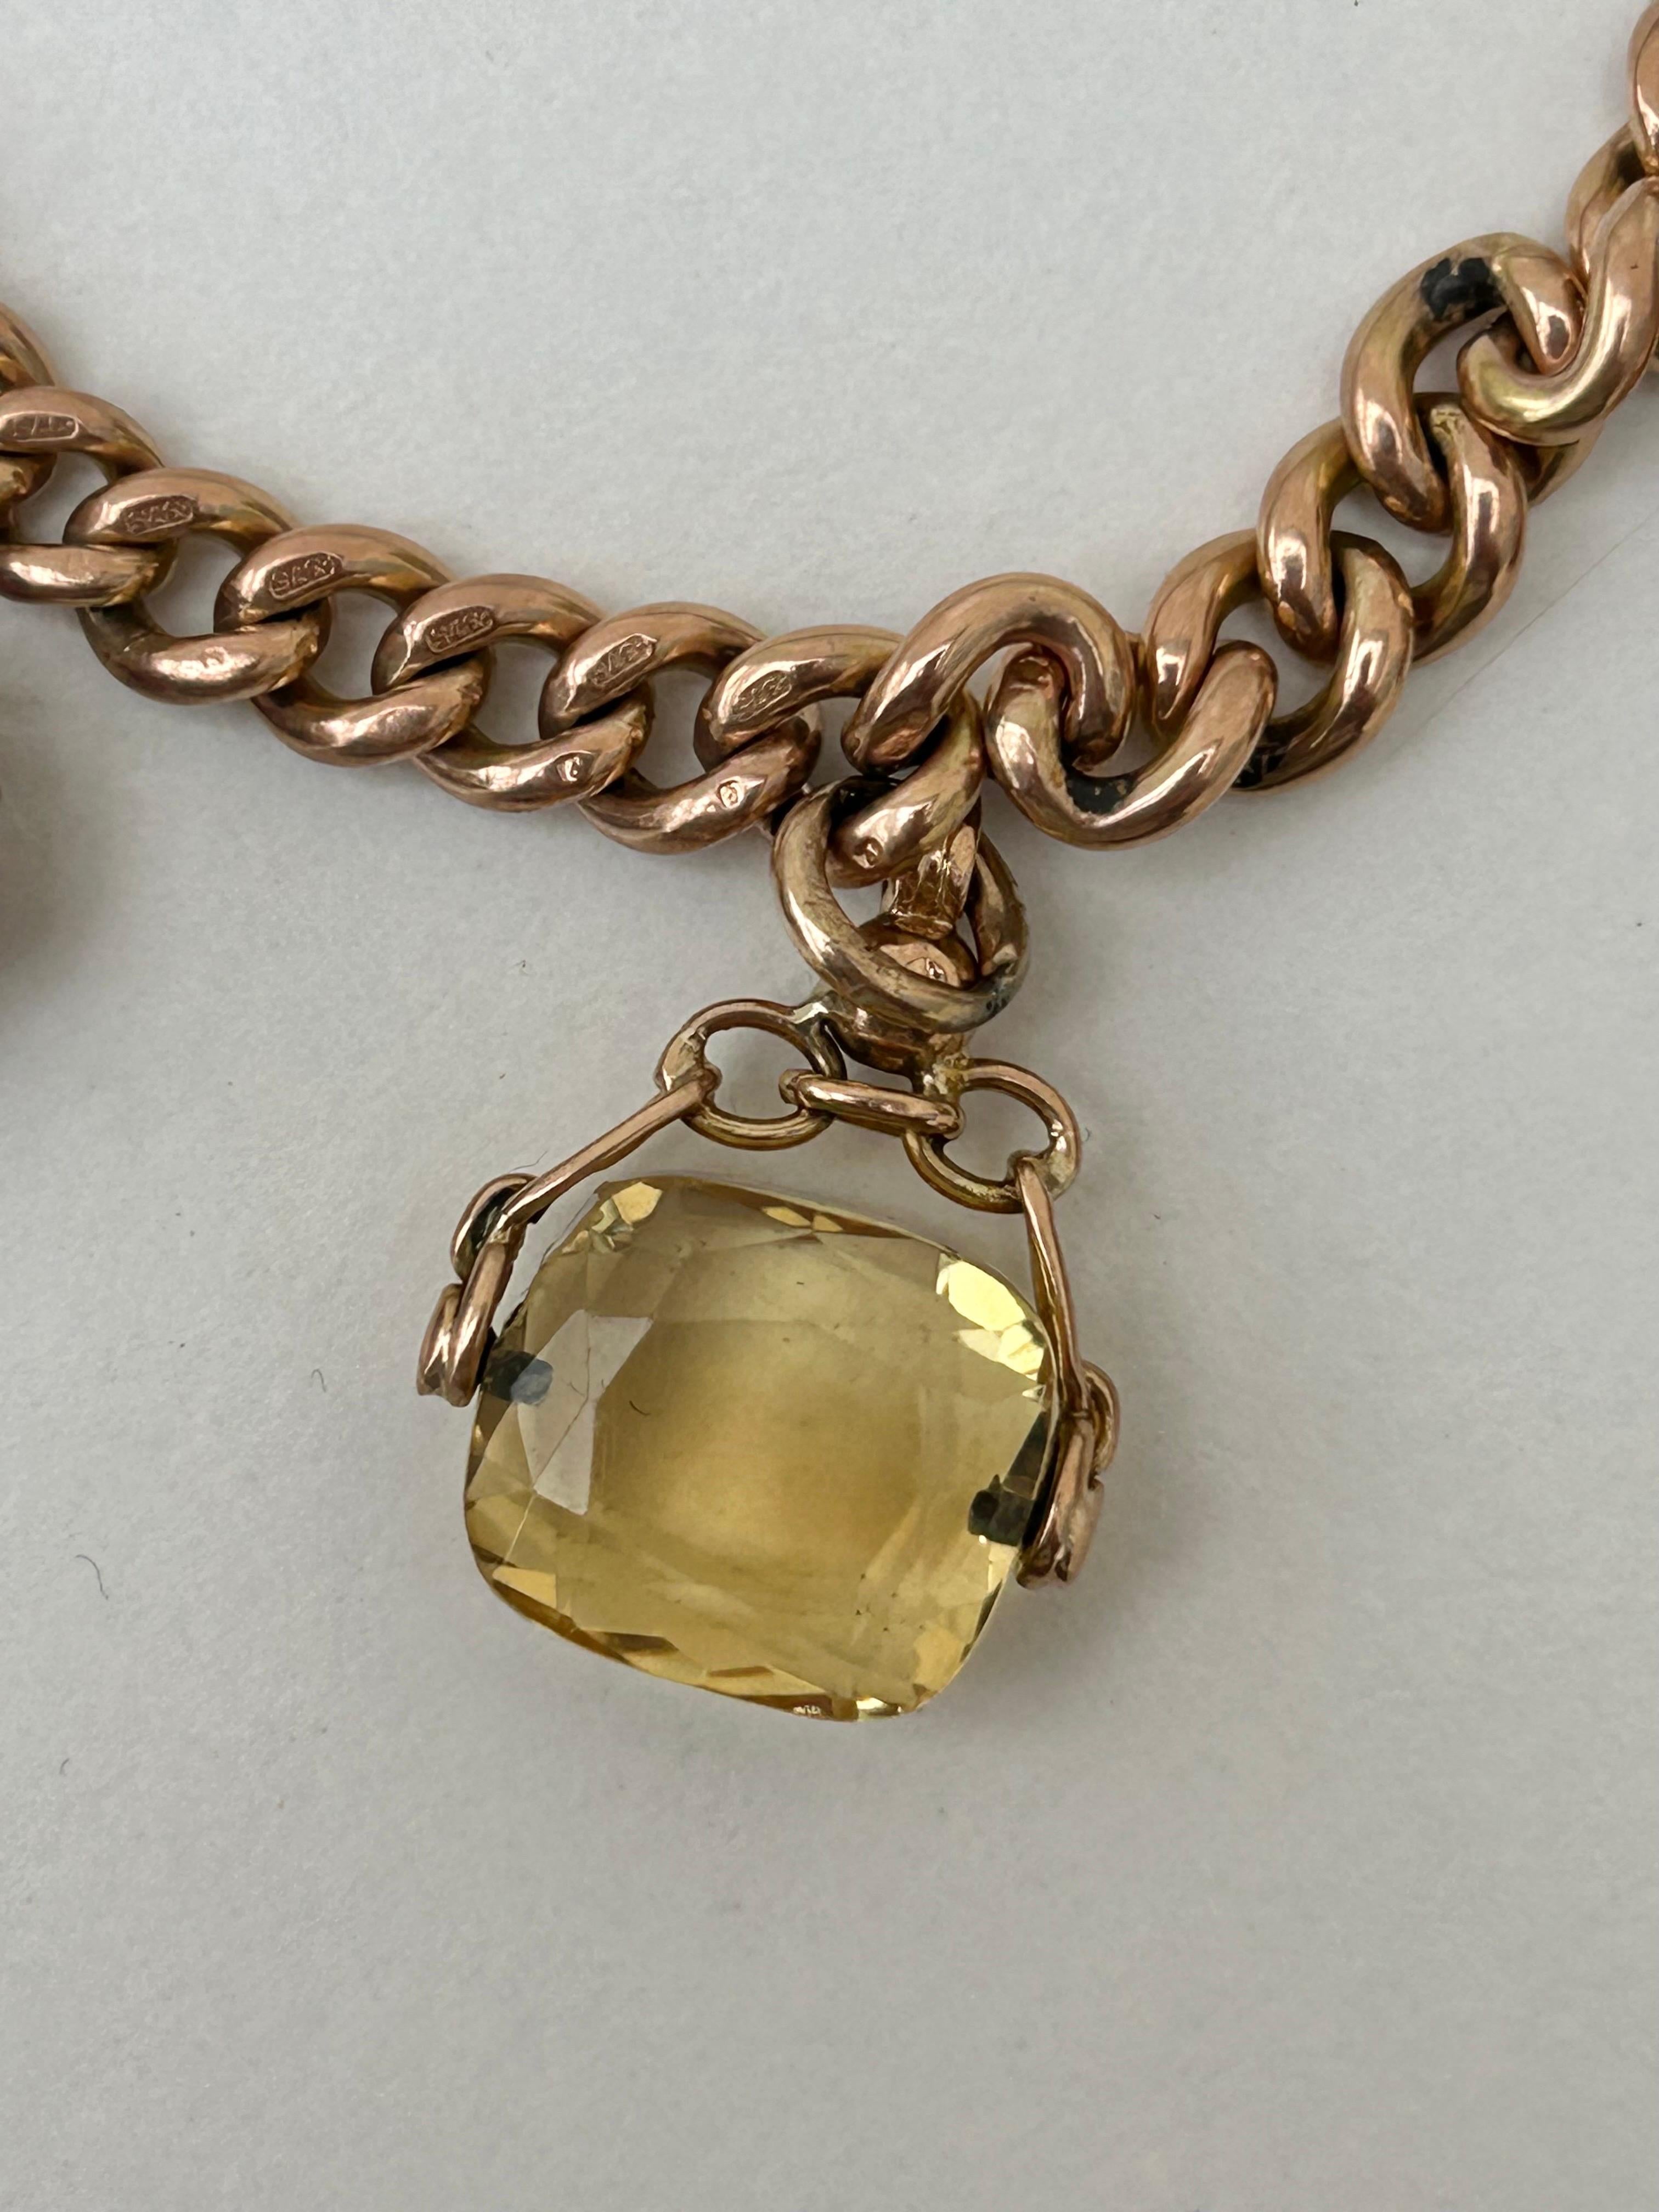 Chunky Antique 9 Carat Yellow Gold Curb Bracelet with 3 Fob Seal Pendant 1